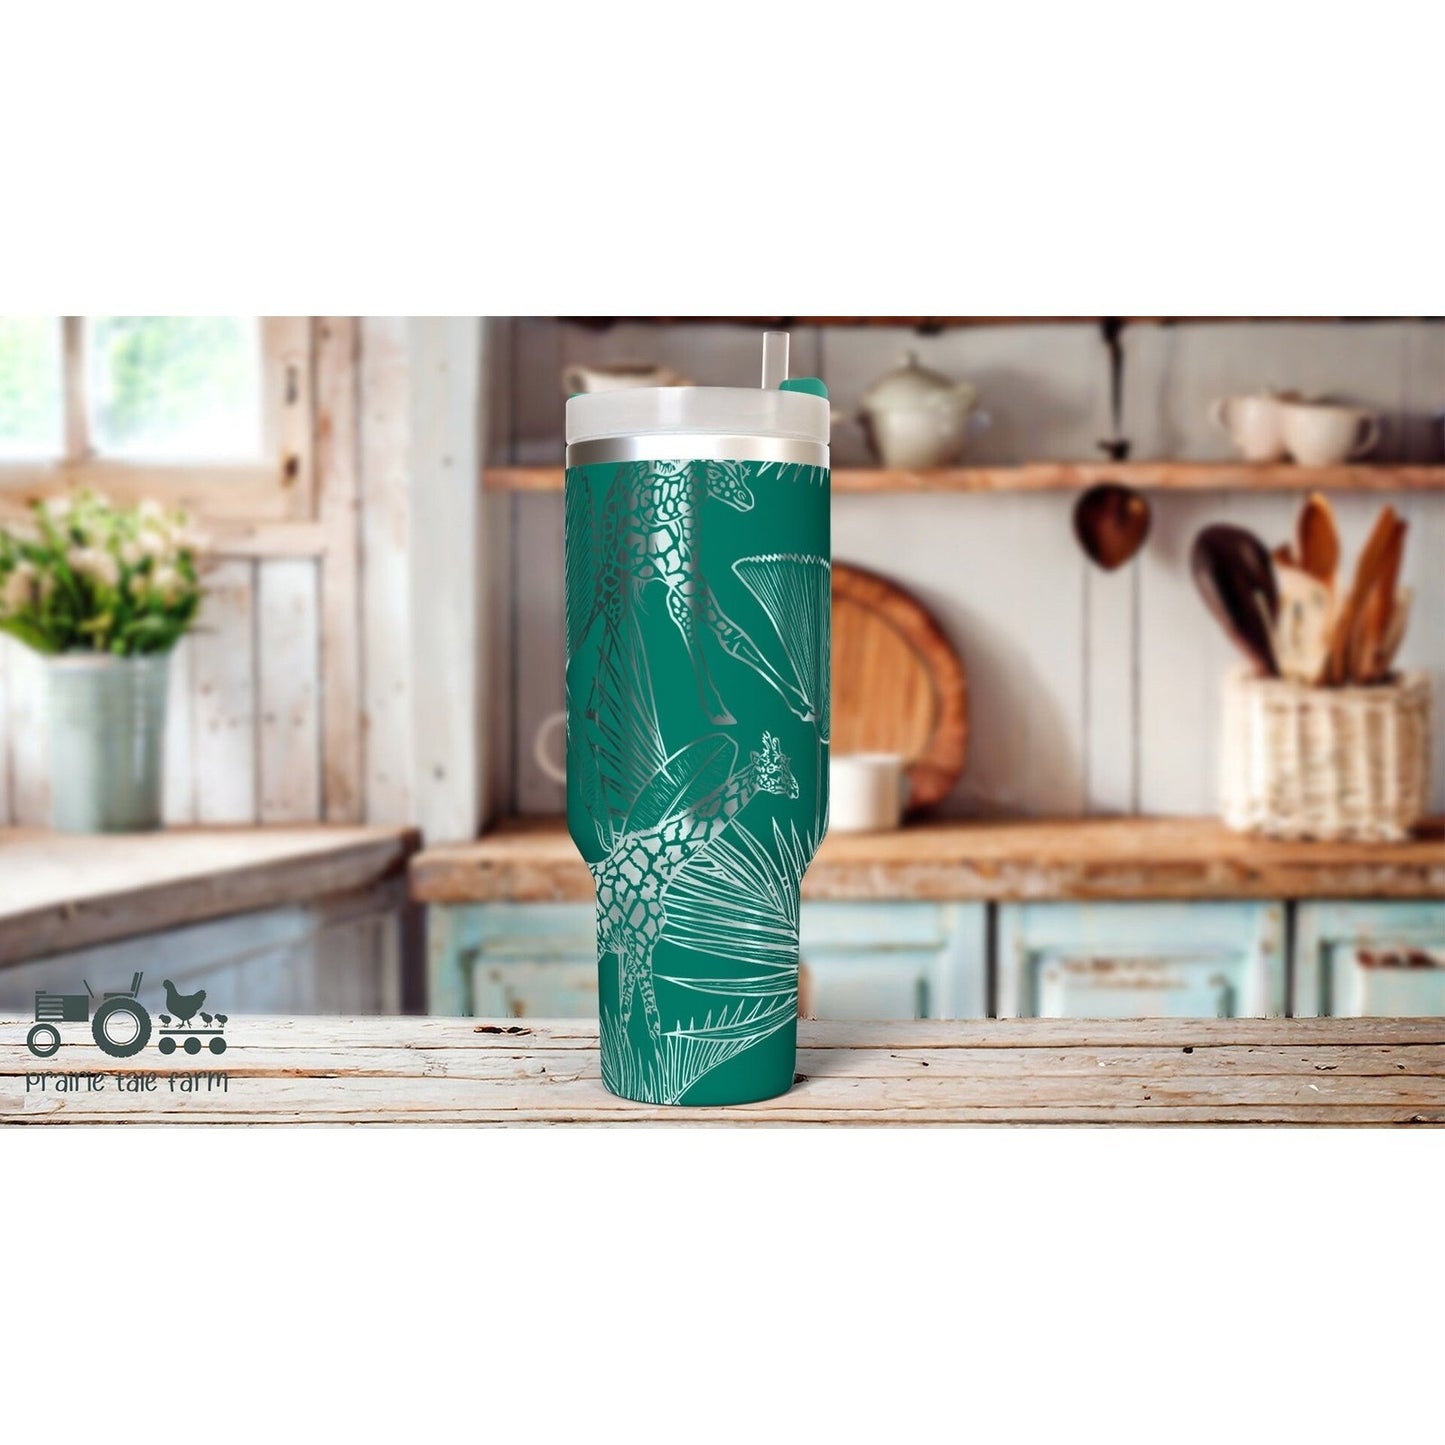 Giraffes Laser Engraved 40 oz Insulated Tumbler with Handle Lid and Straw. Double Wall Insulated Cup